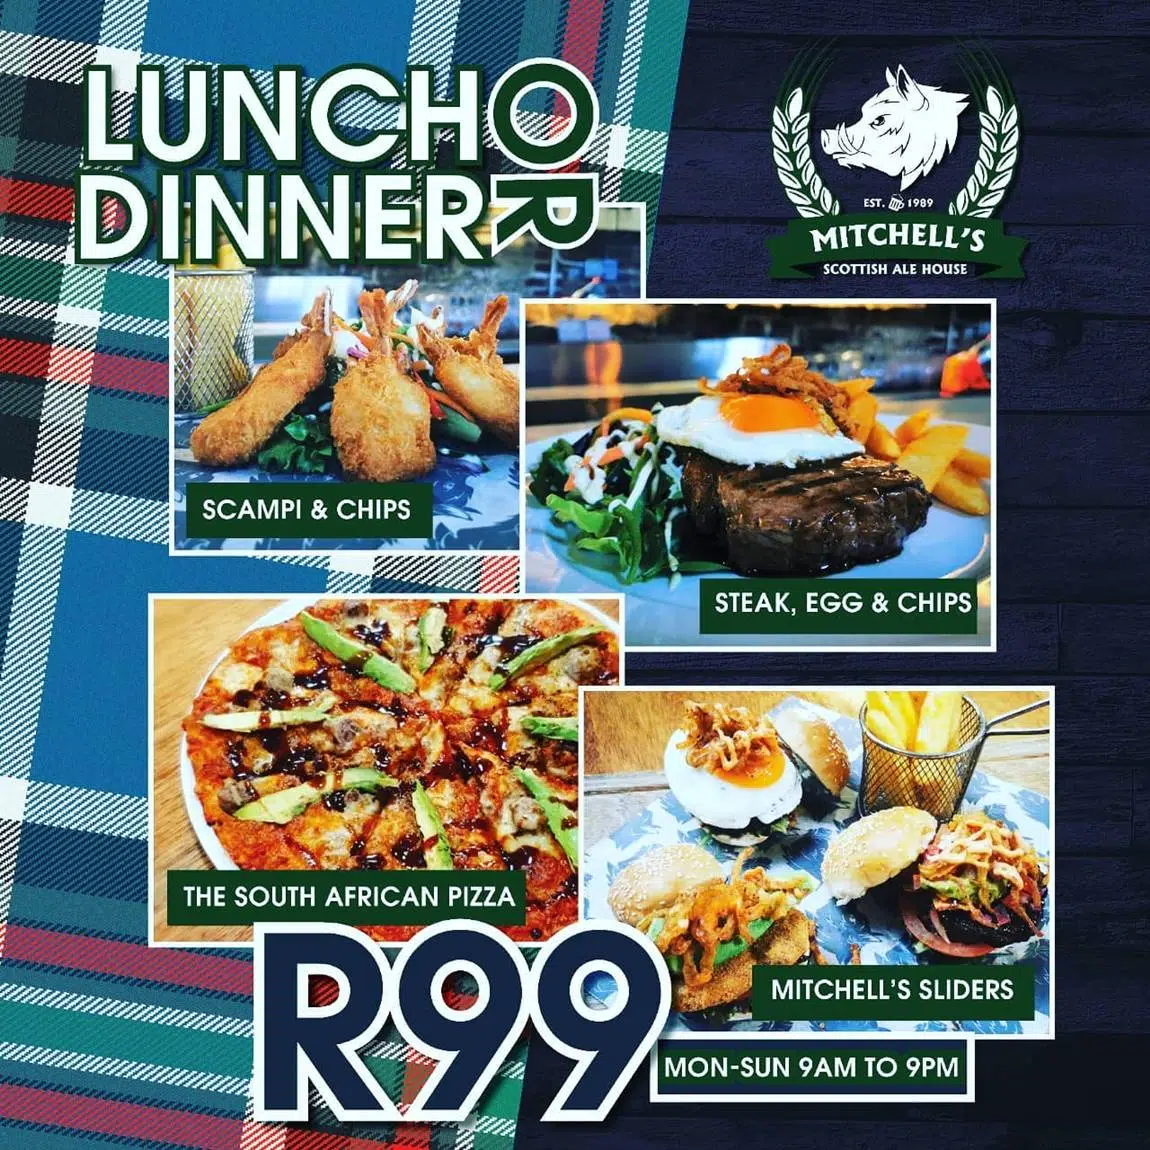 R99 Specials at Mitchell’s Scottish Ale House